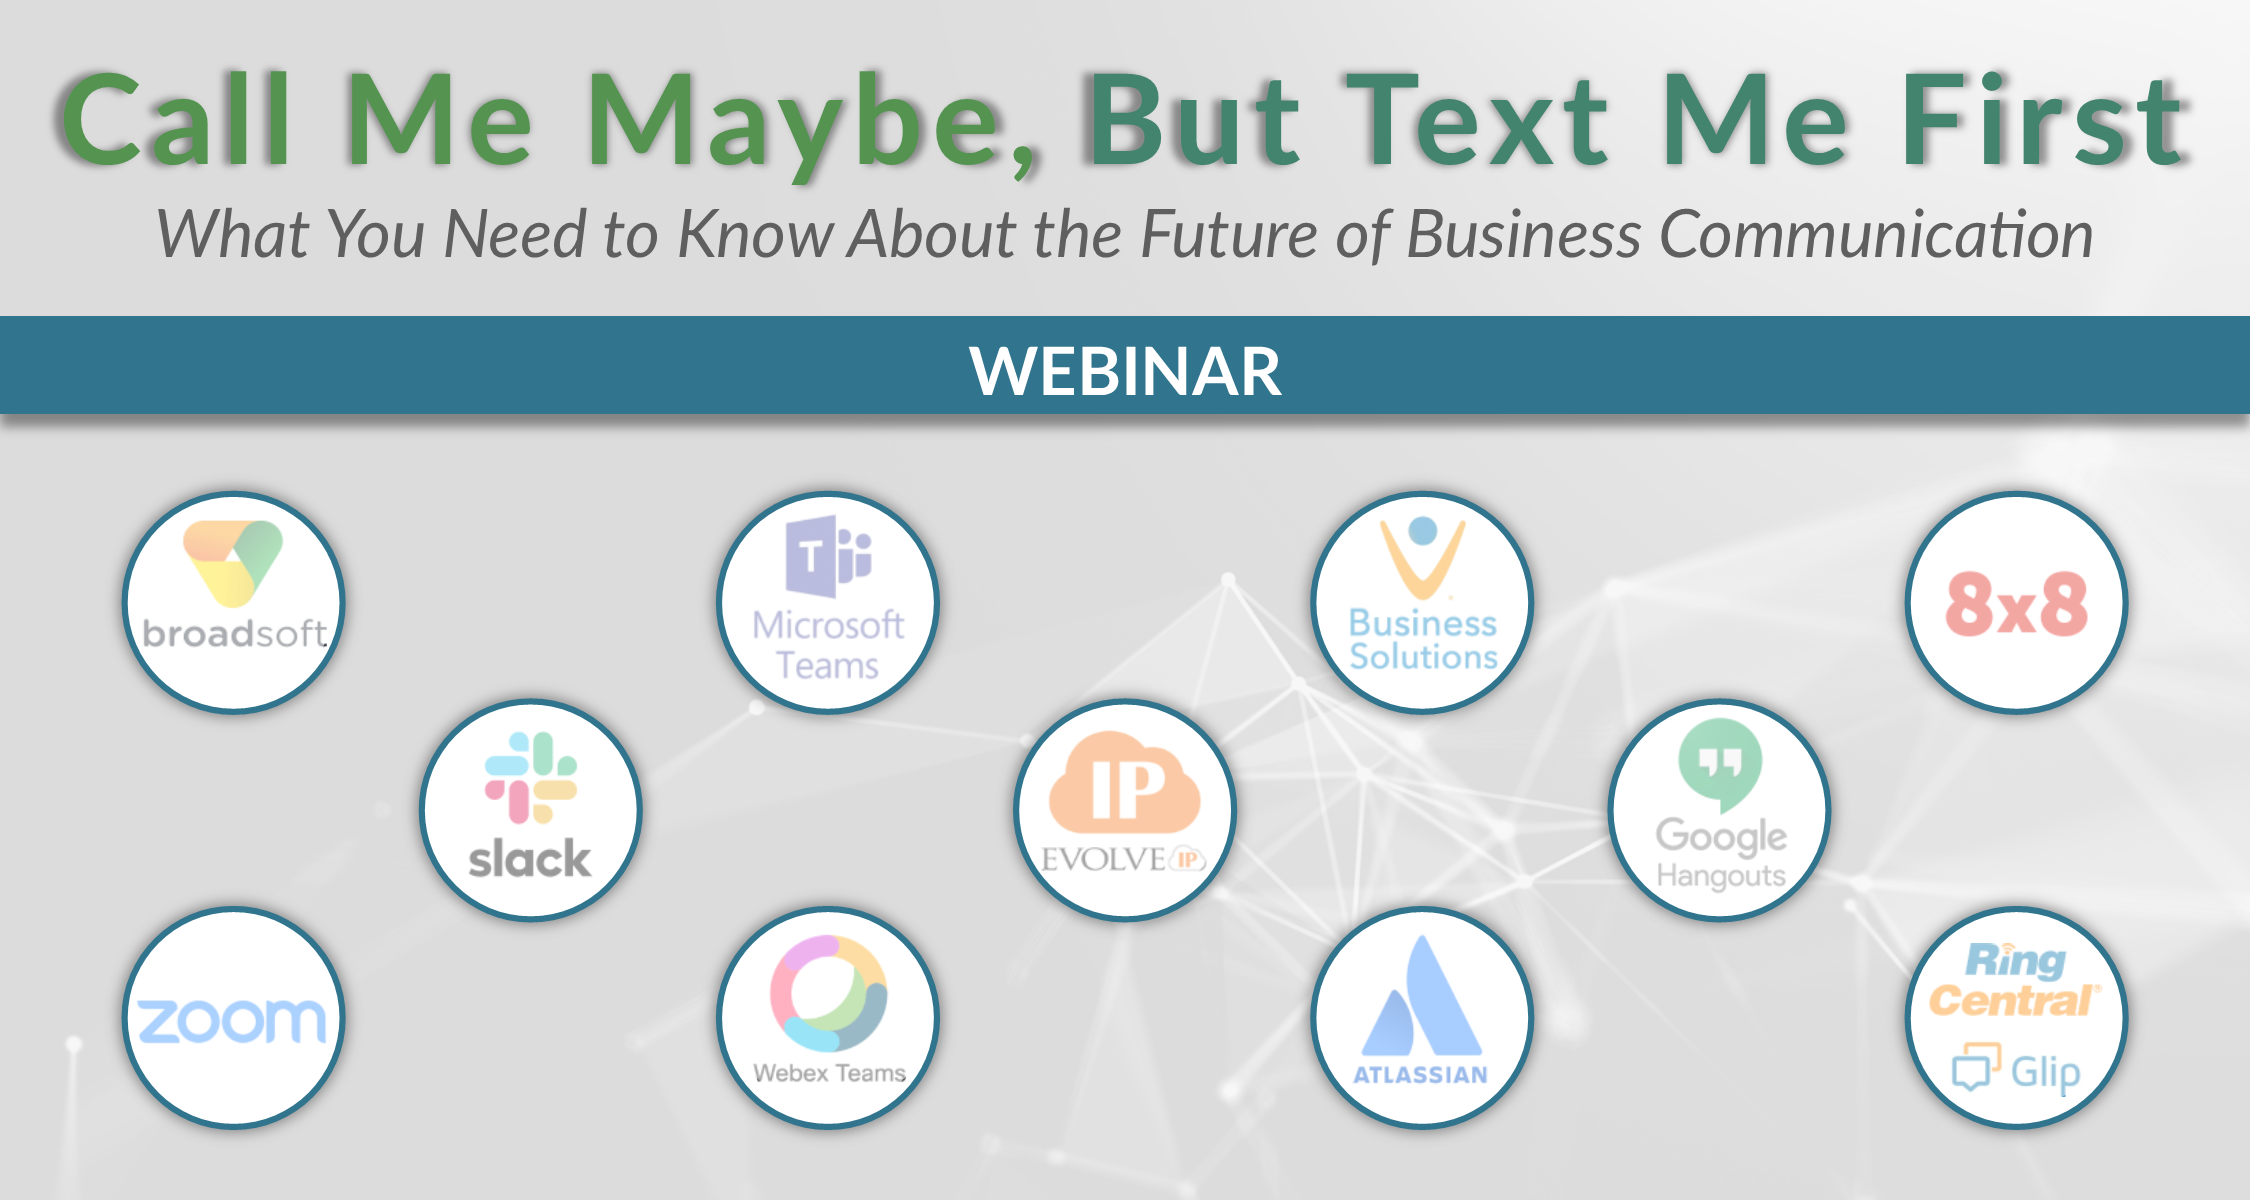 Webinar: Call Me Maybe, But Text Me First